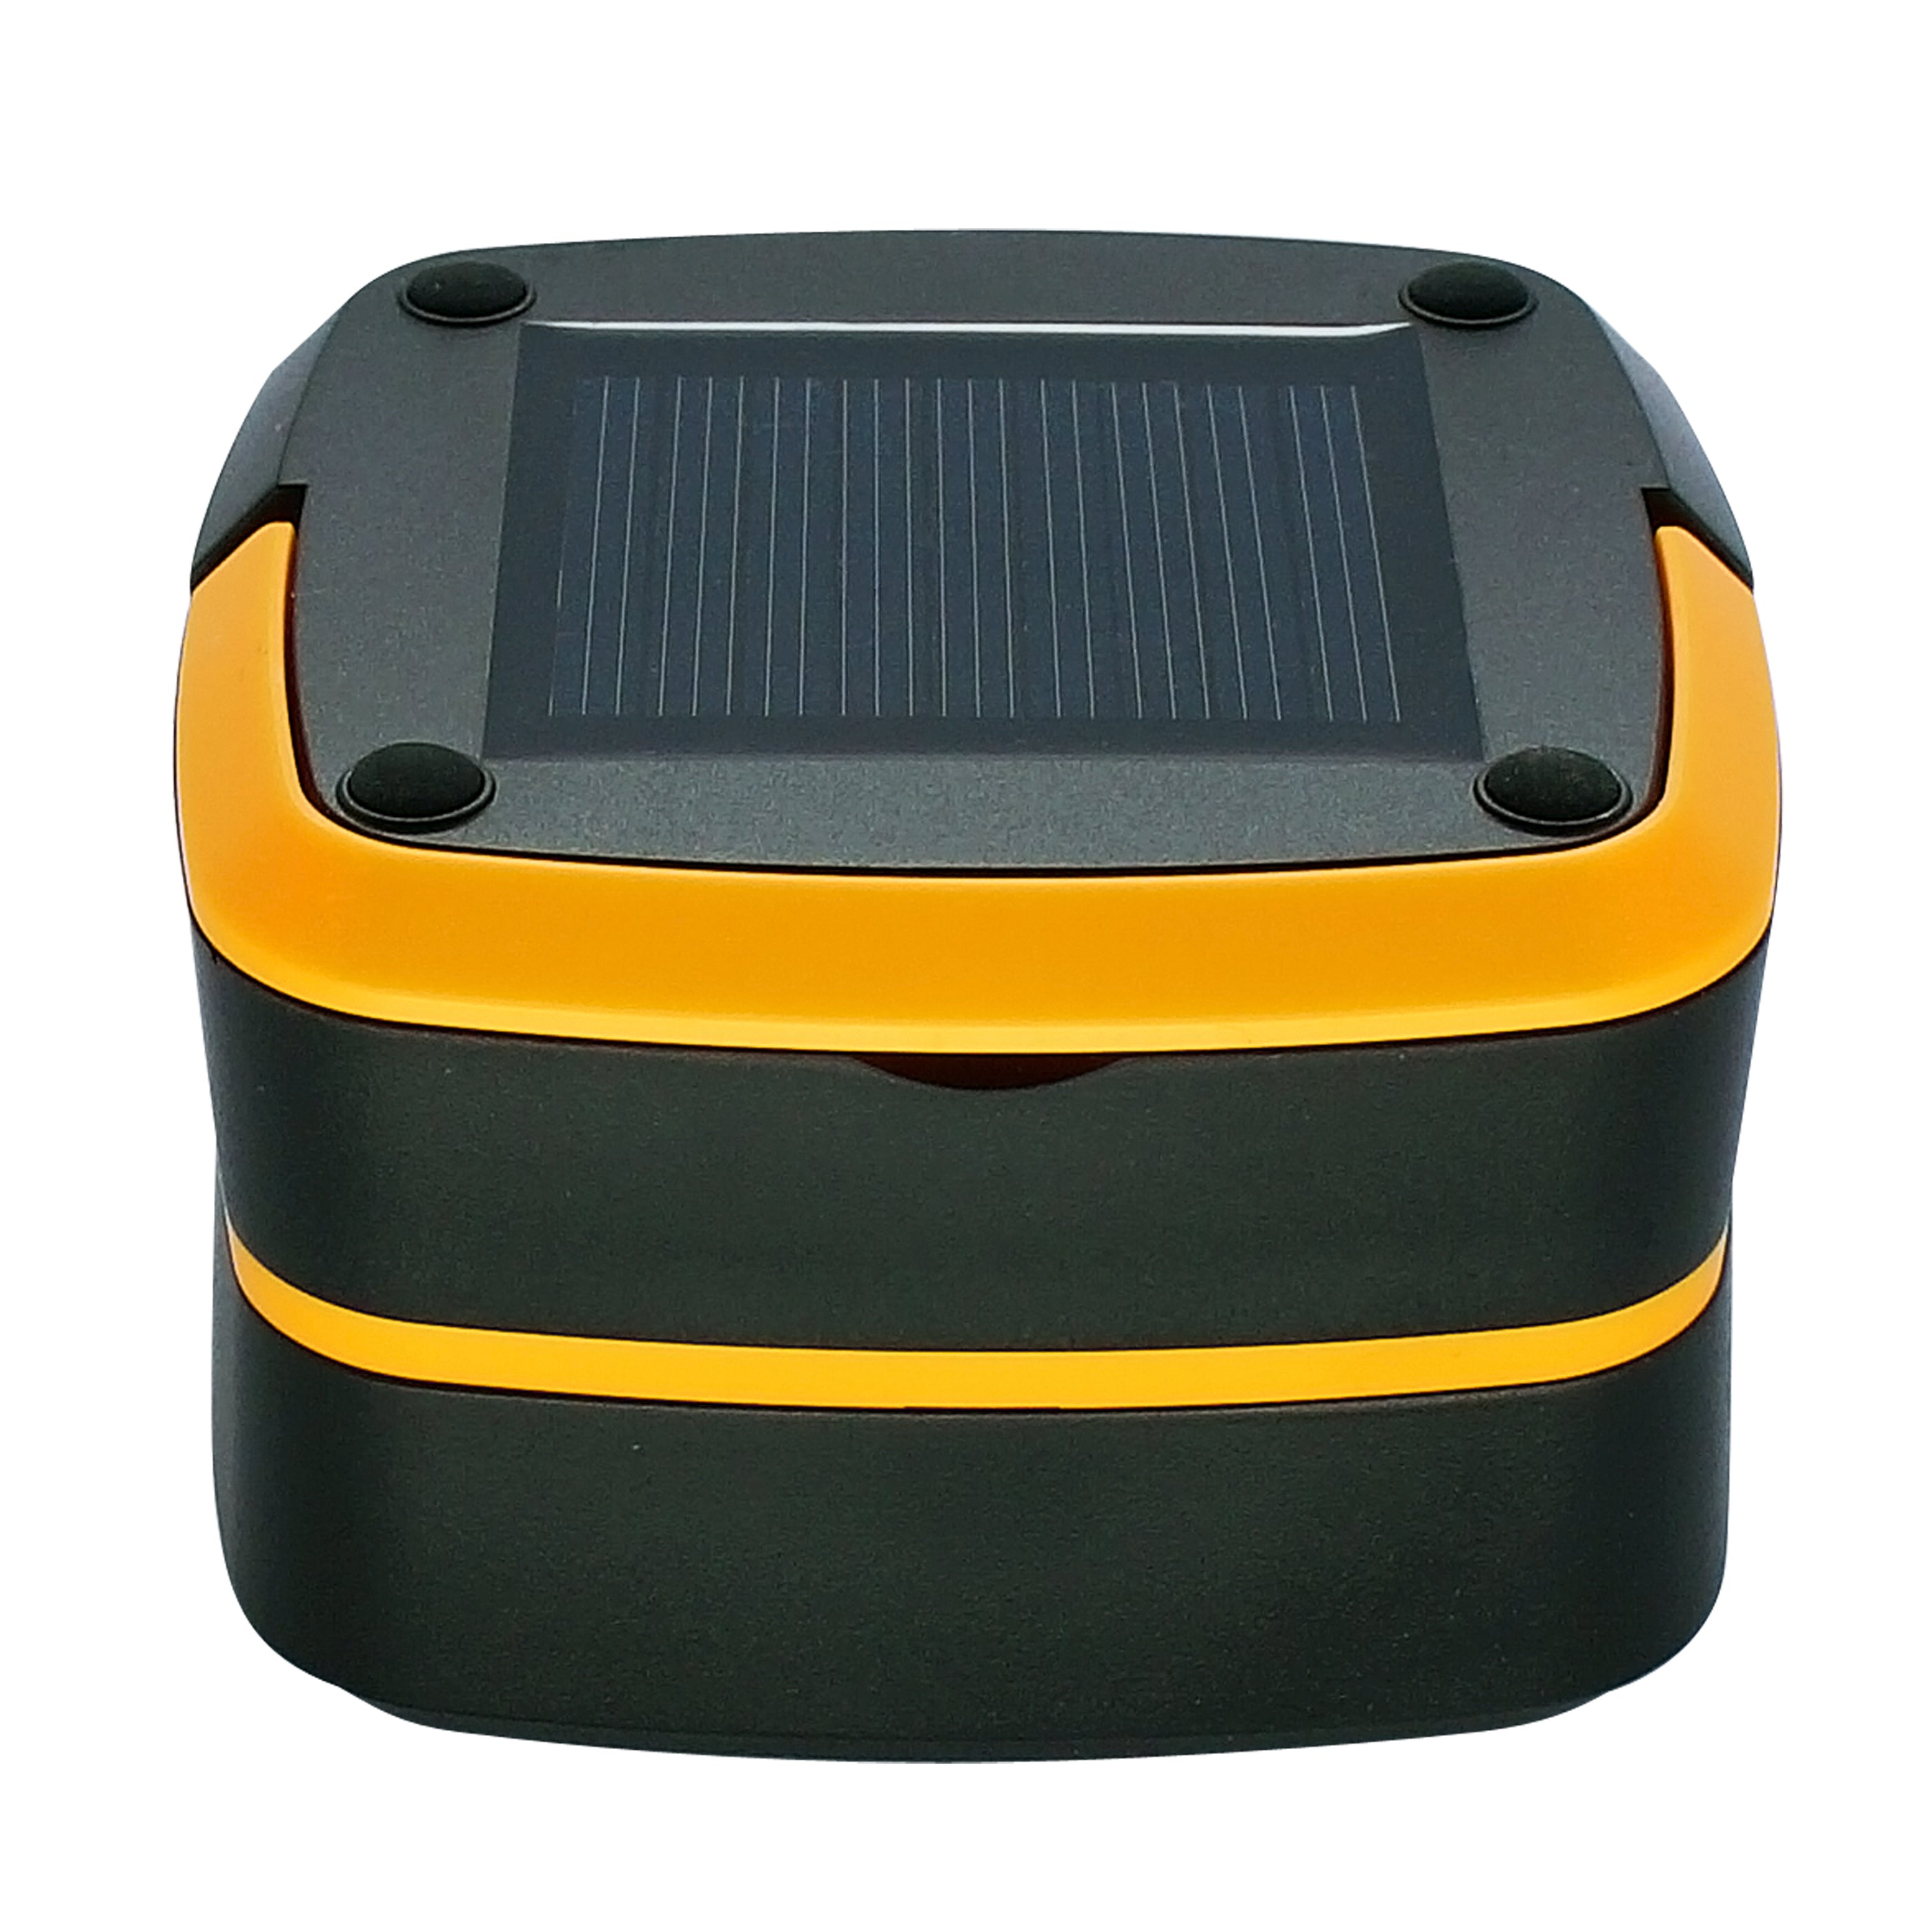 Compact Solar Charging LED Camping Lantern Flashlight For Travel, Camping Fishing - Sun Powered and USB Rechargeable, Portable Mini Collapsible Telescopic Lantern Design with Mobile Phone Charger